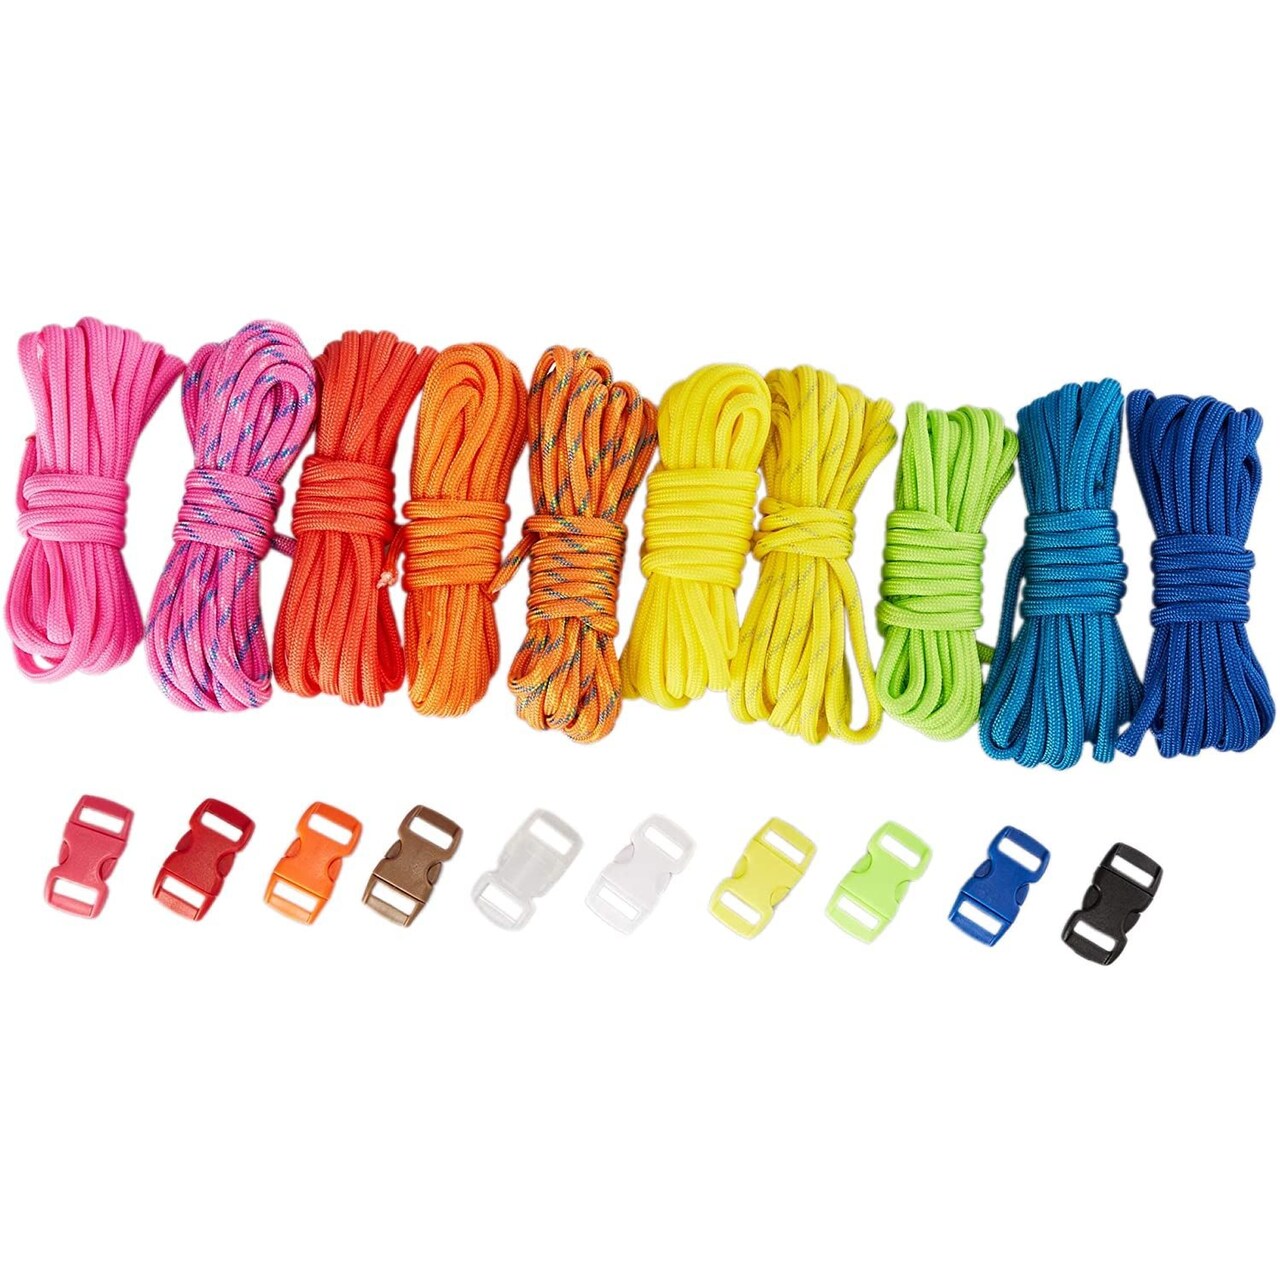 Paracord Rope with Buckles for Crafts (10 Colors, 20 Pieces)